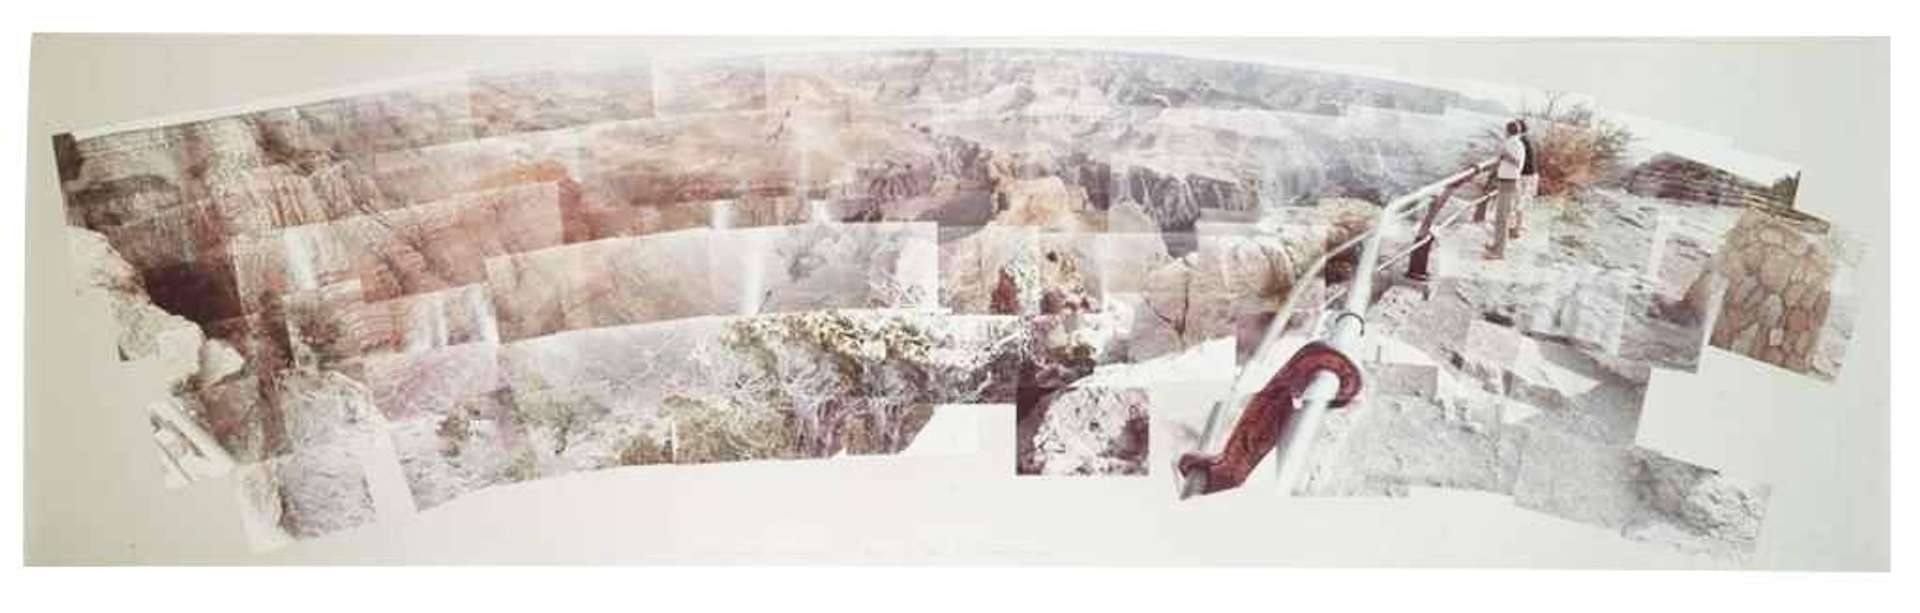 David Hockney: The Grand Canyon South Rim With Rail, Oct 1982 - Signed Print